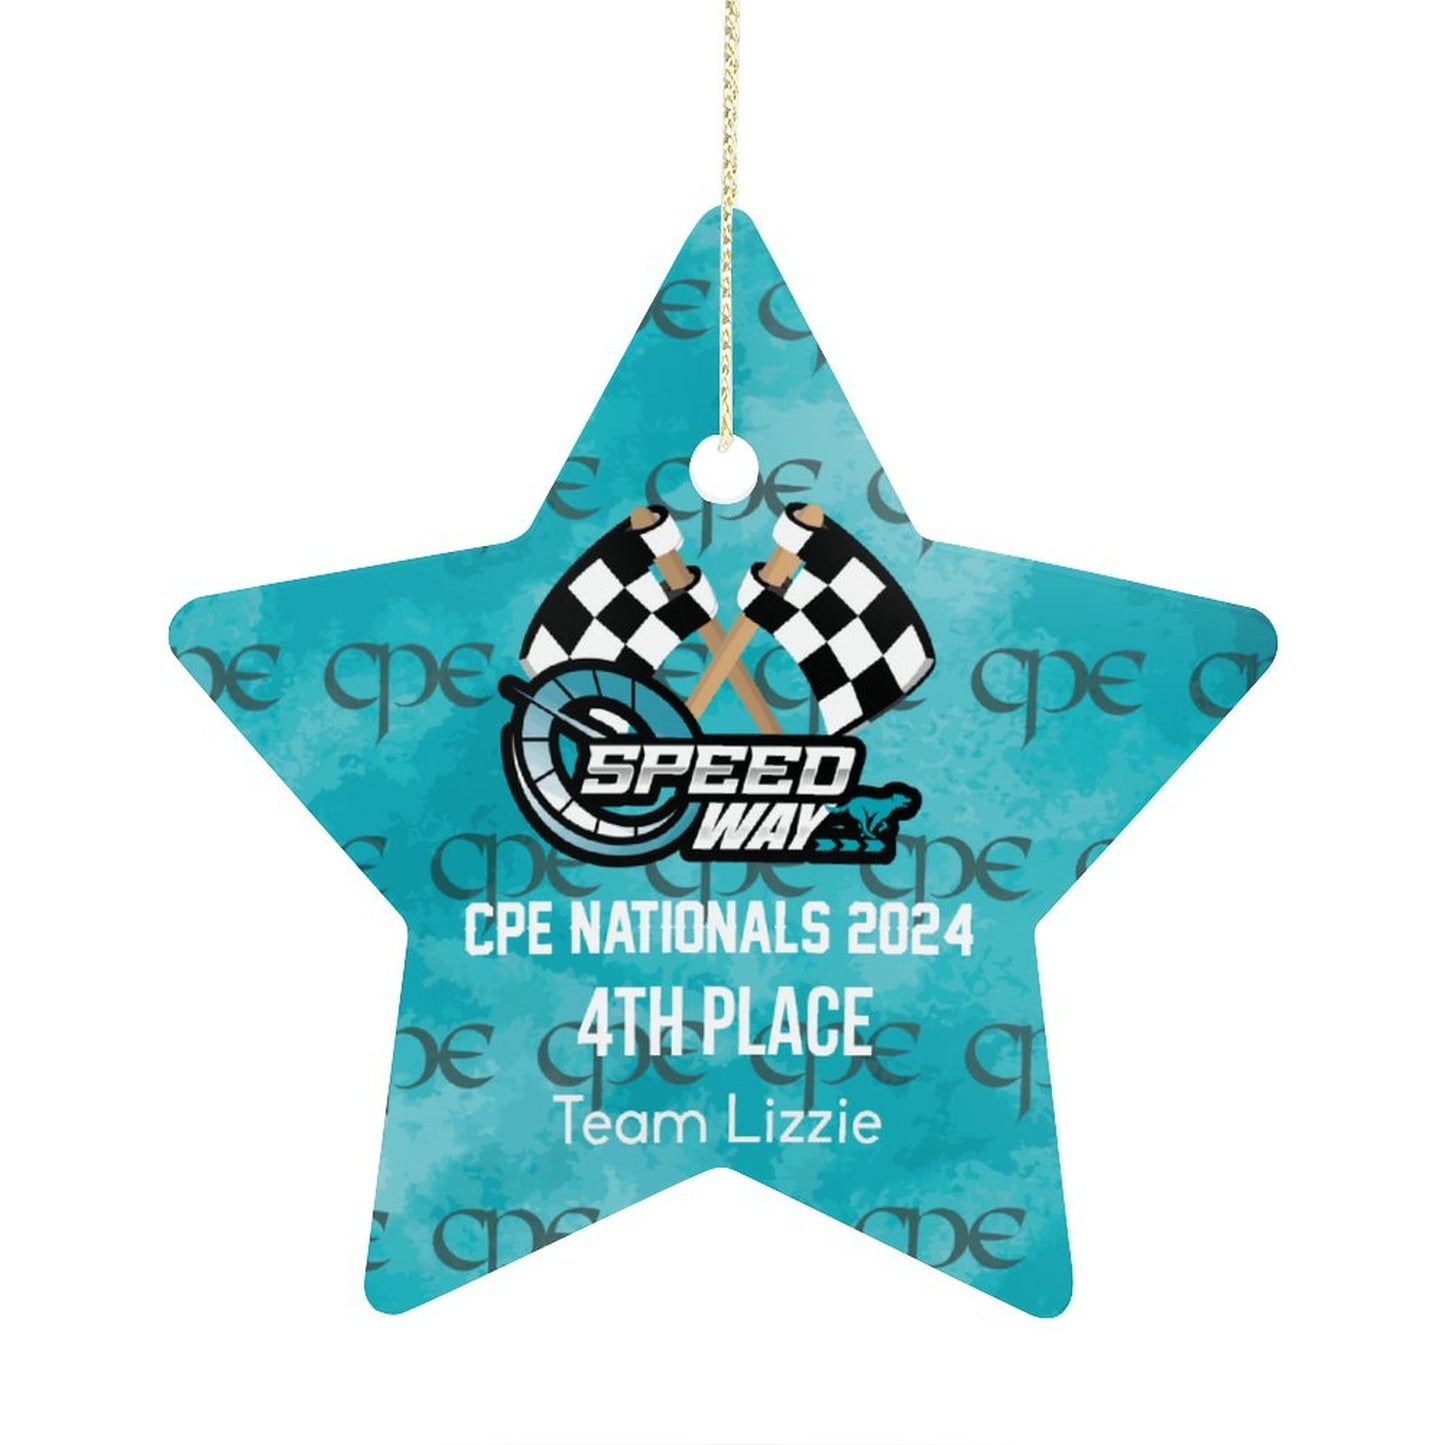 CPE Speedway 4th Place